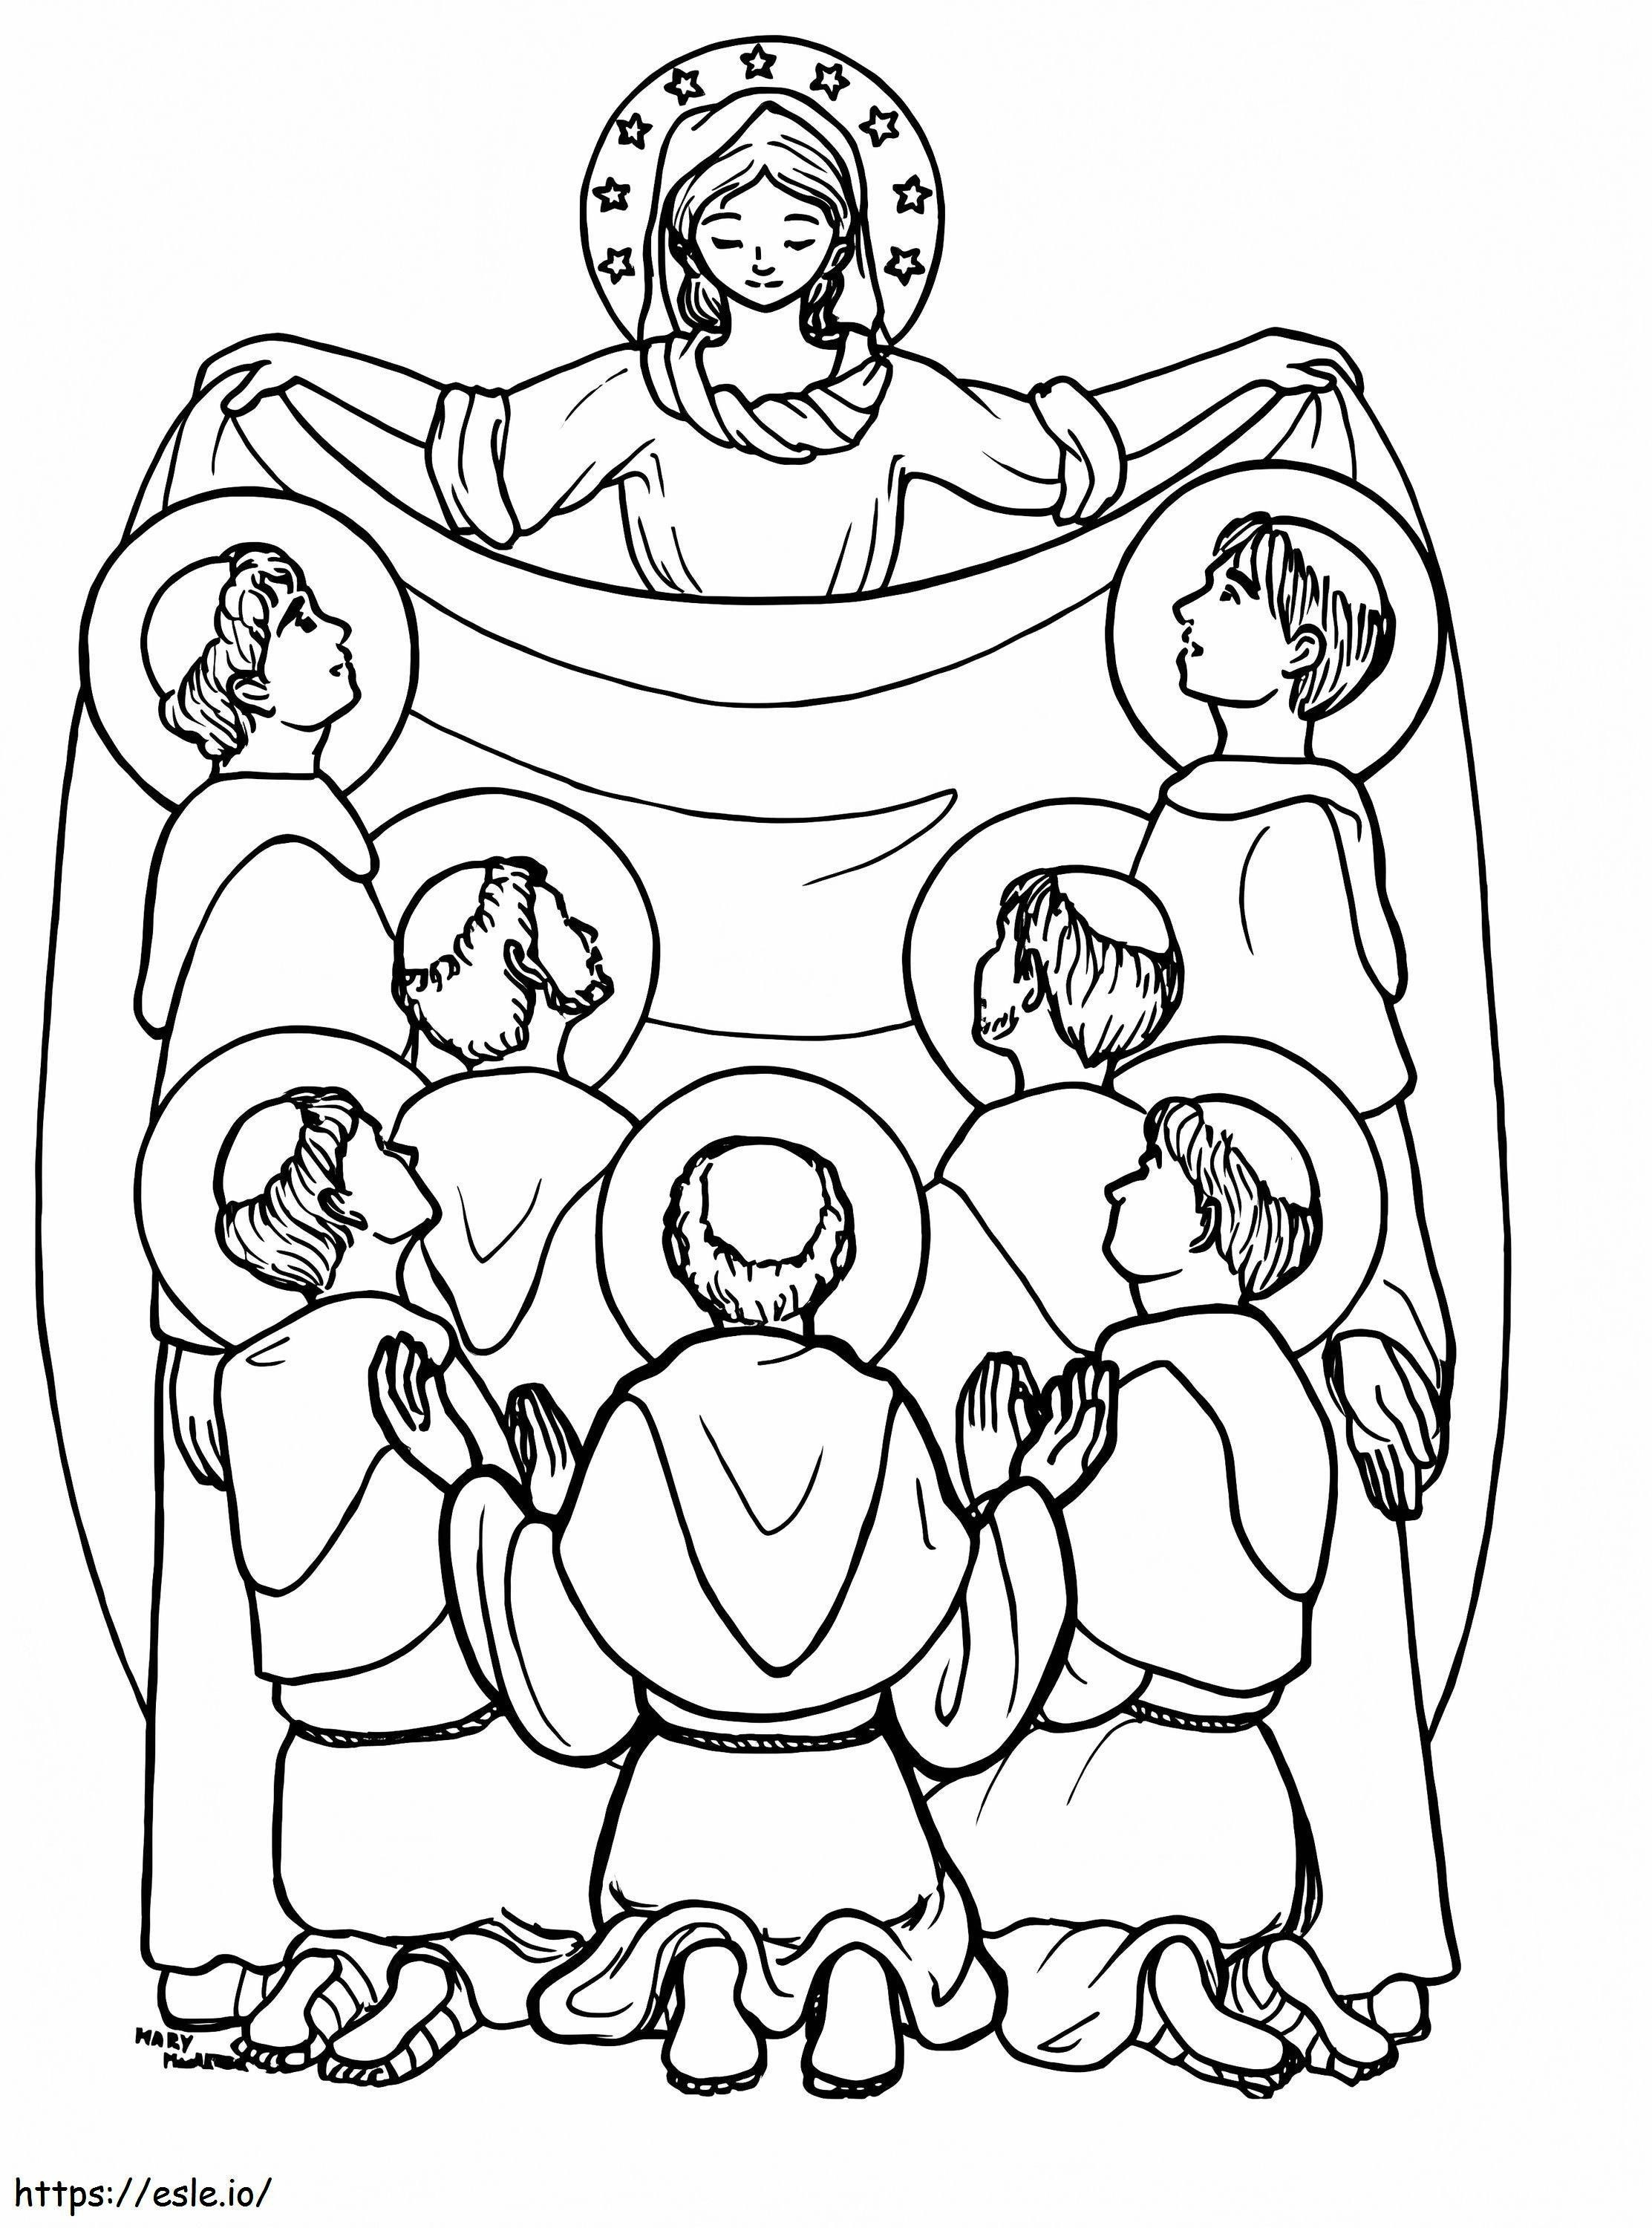 All Saints Day 5 coloring page